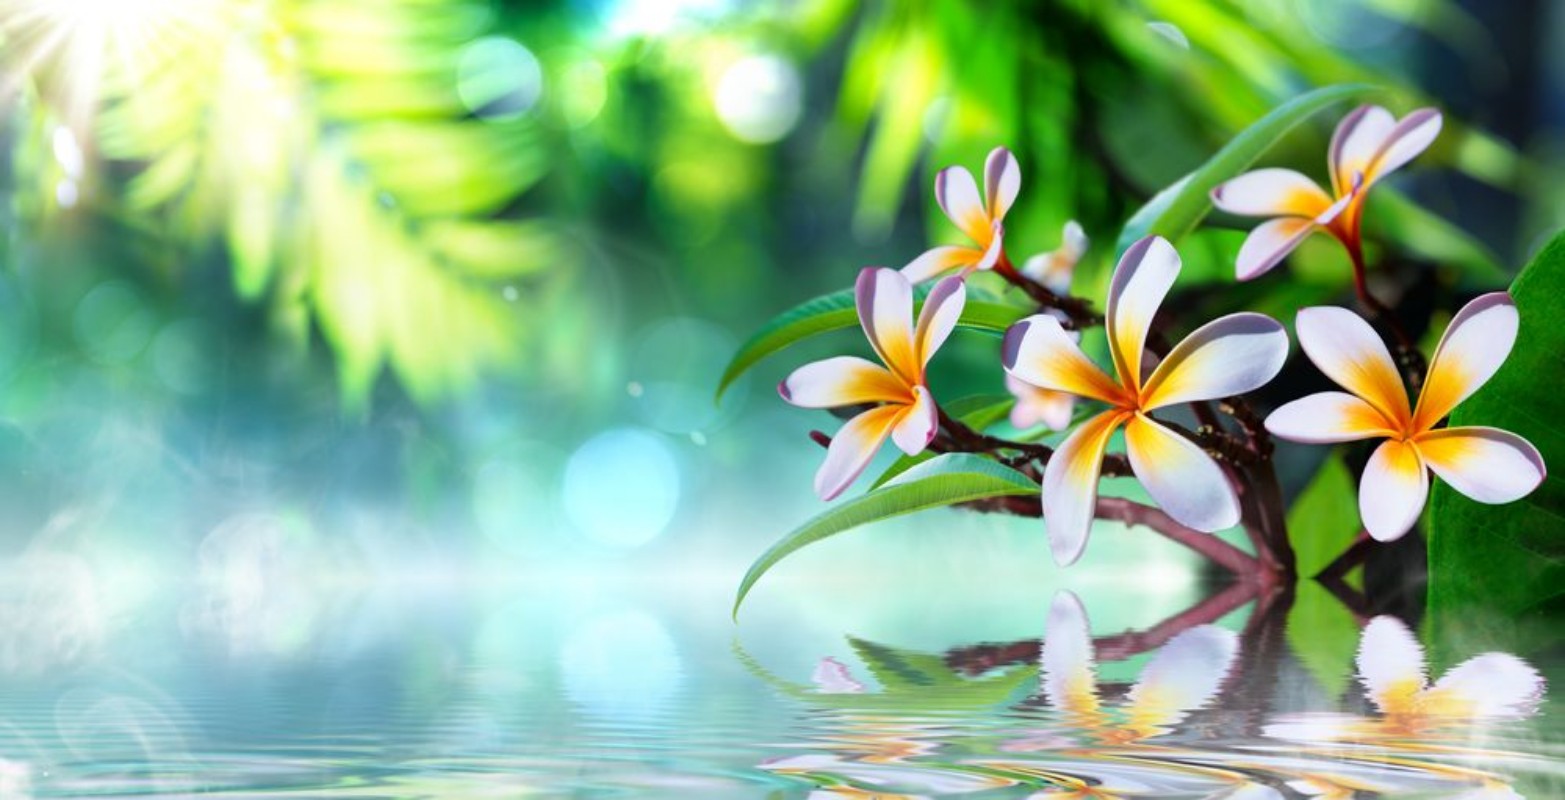 Image de Zen garden with frangipani and vapour on water